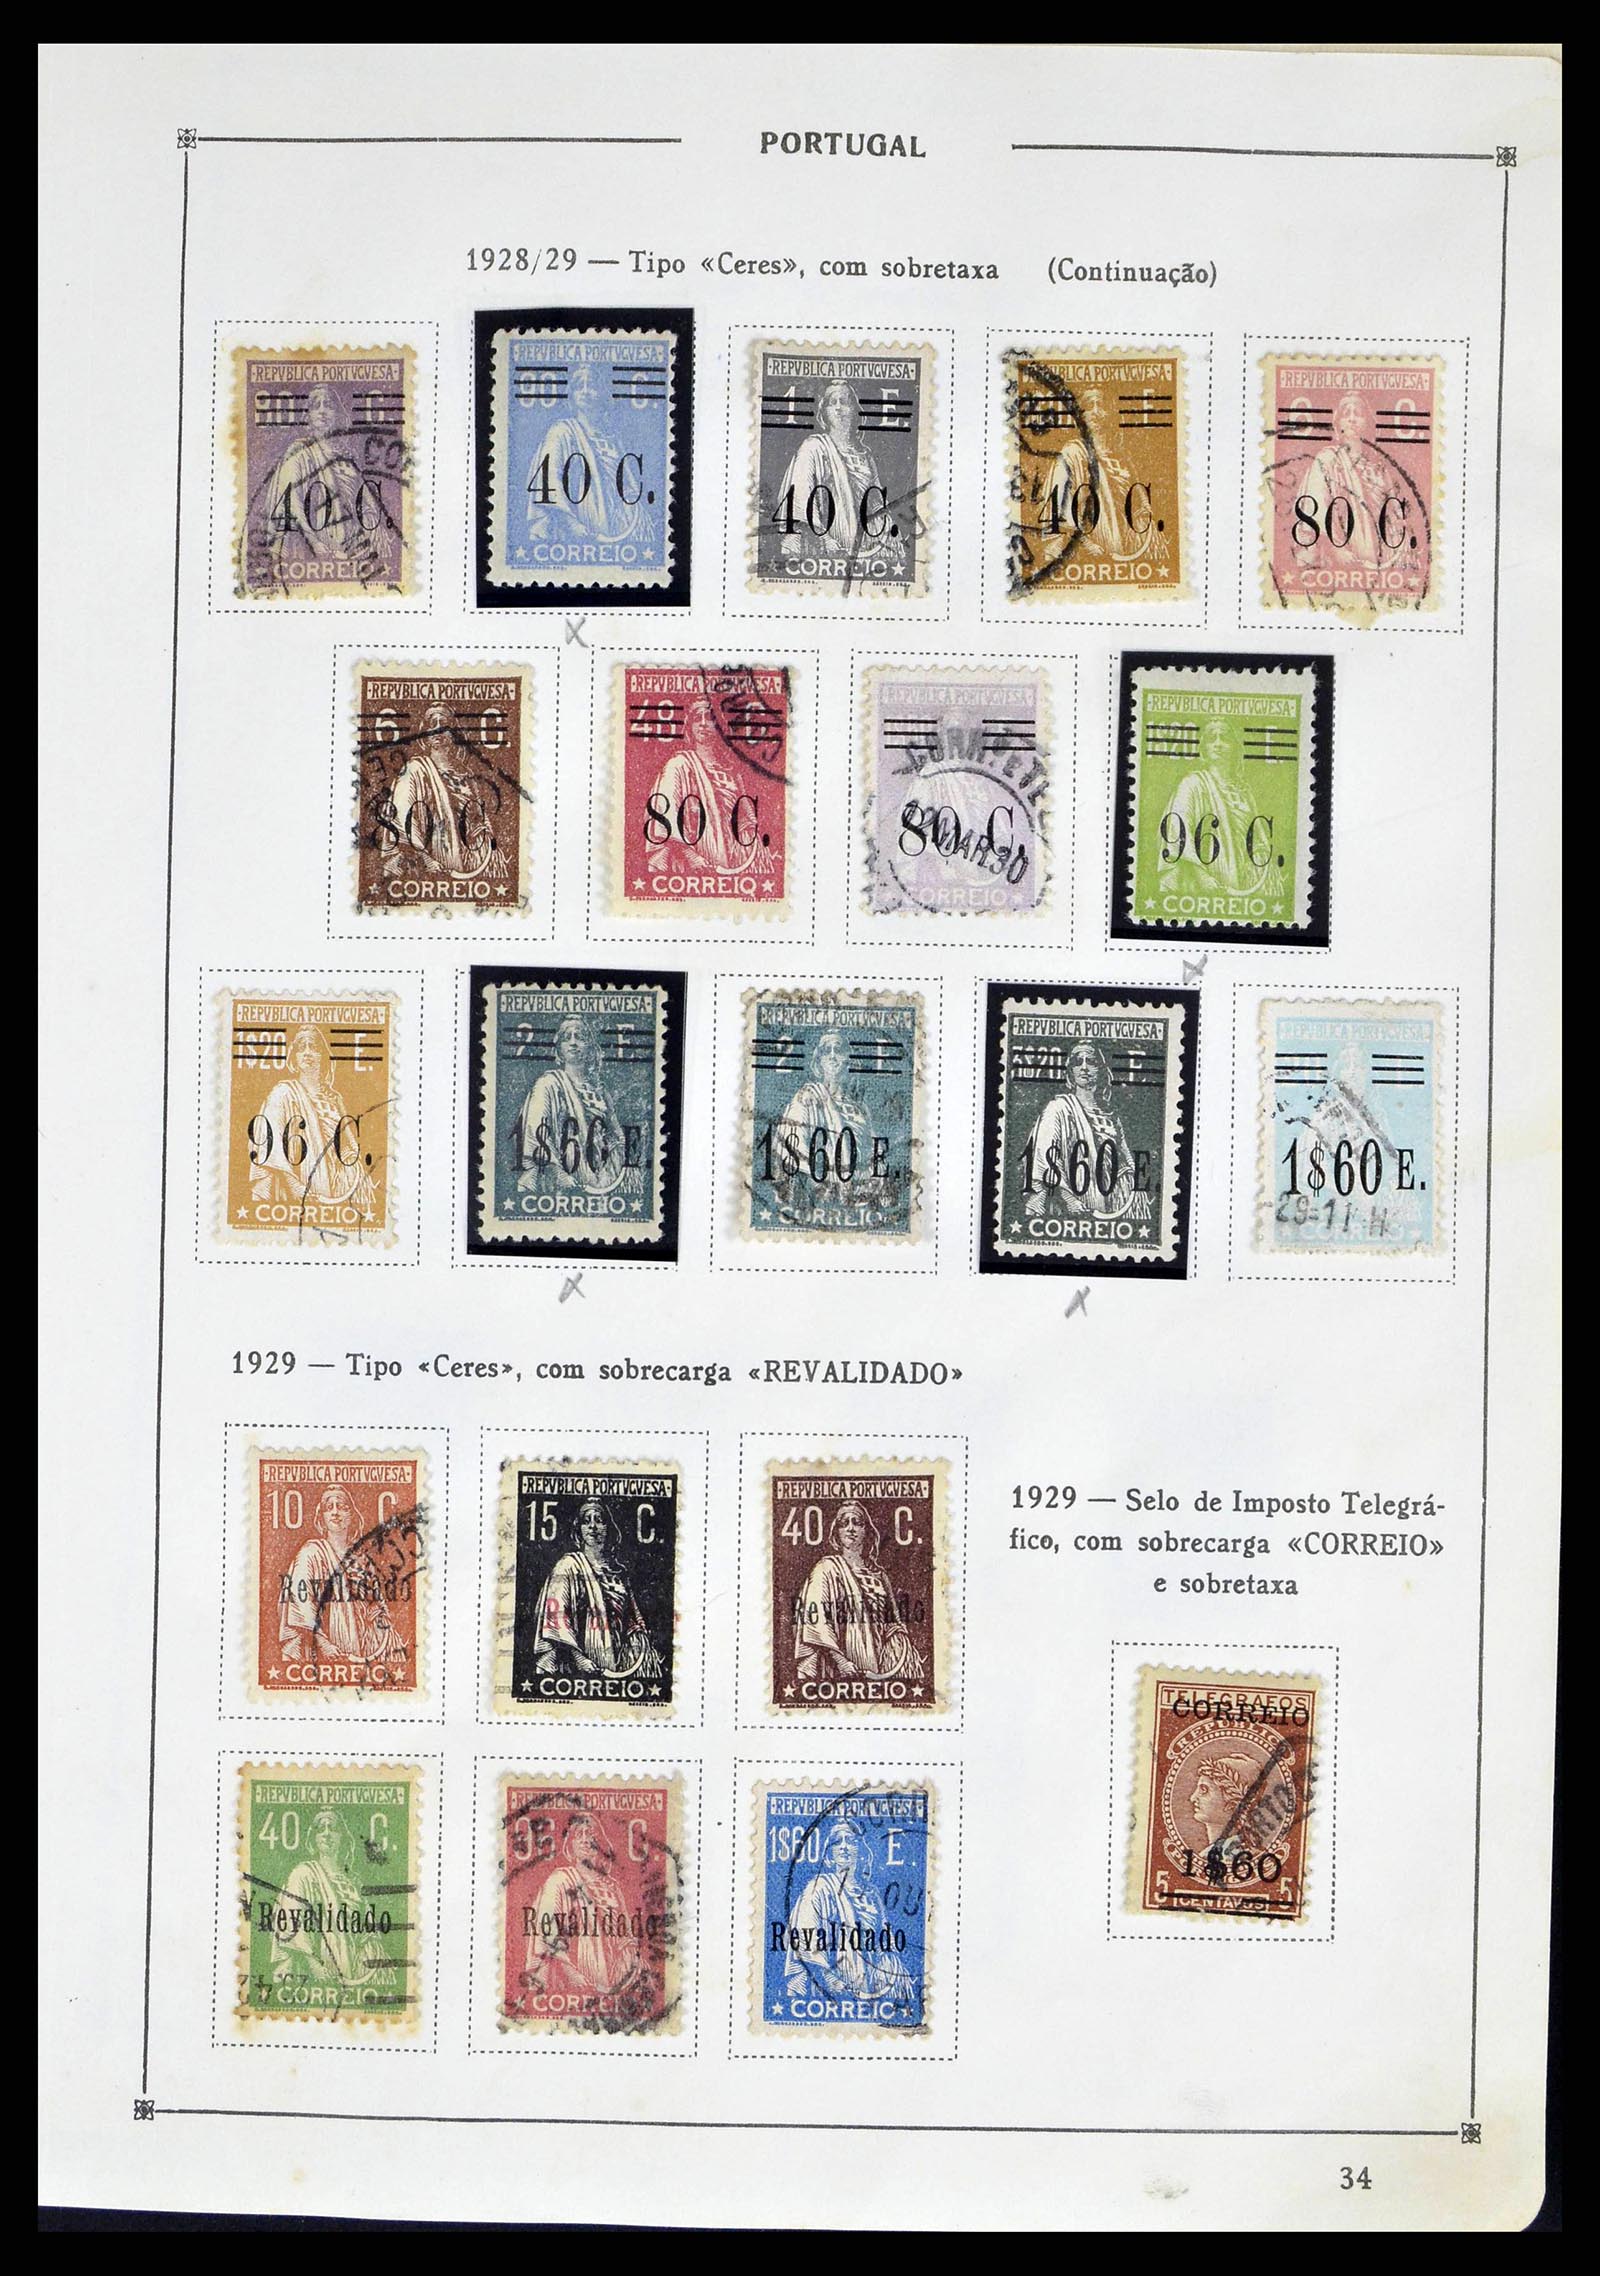 38730 0036 - Stamp collection 38730 Portugal 1852-1999.